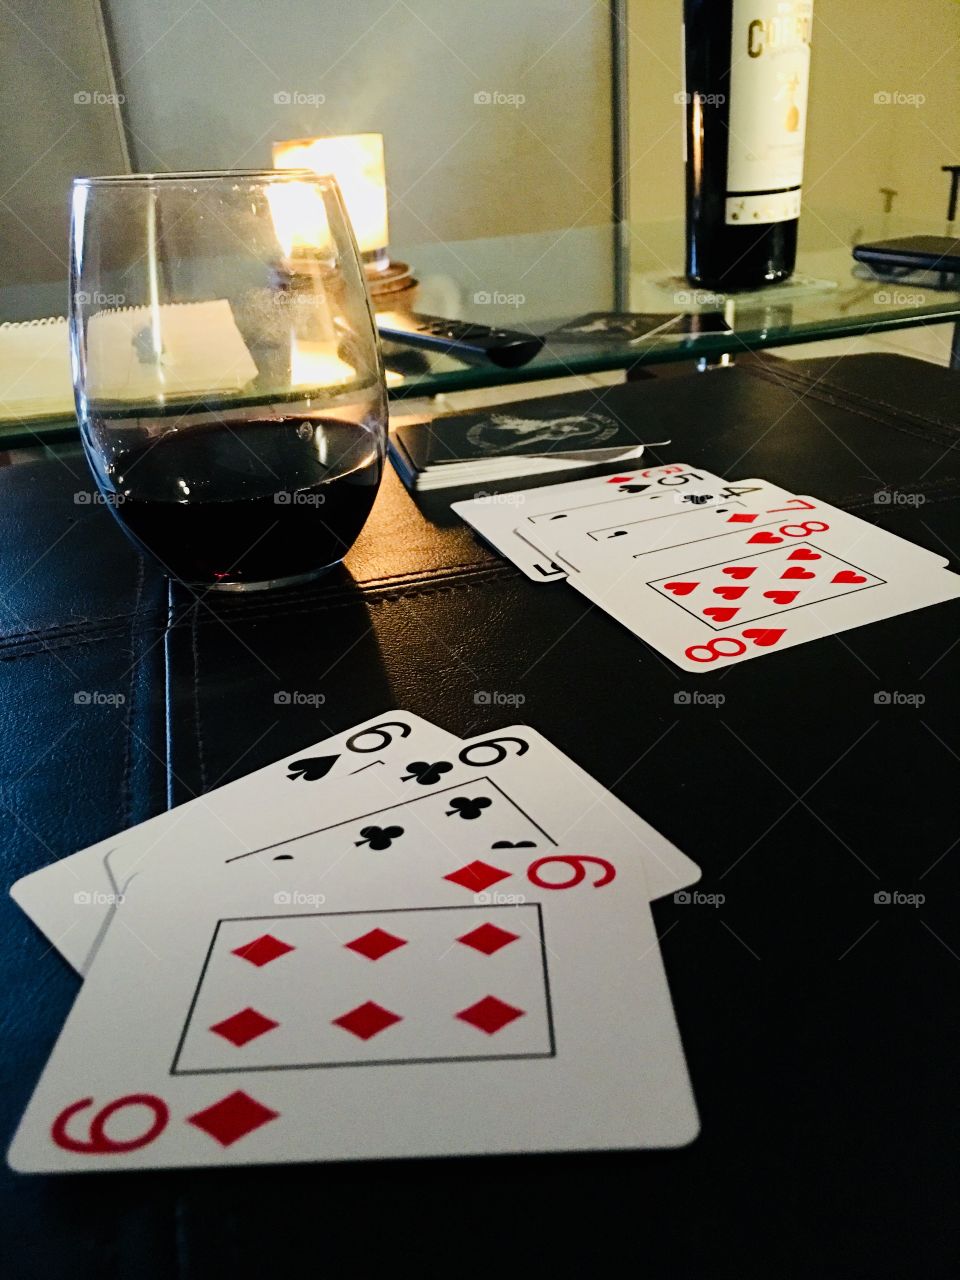 Cards and wine